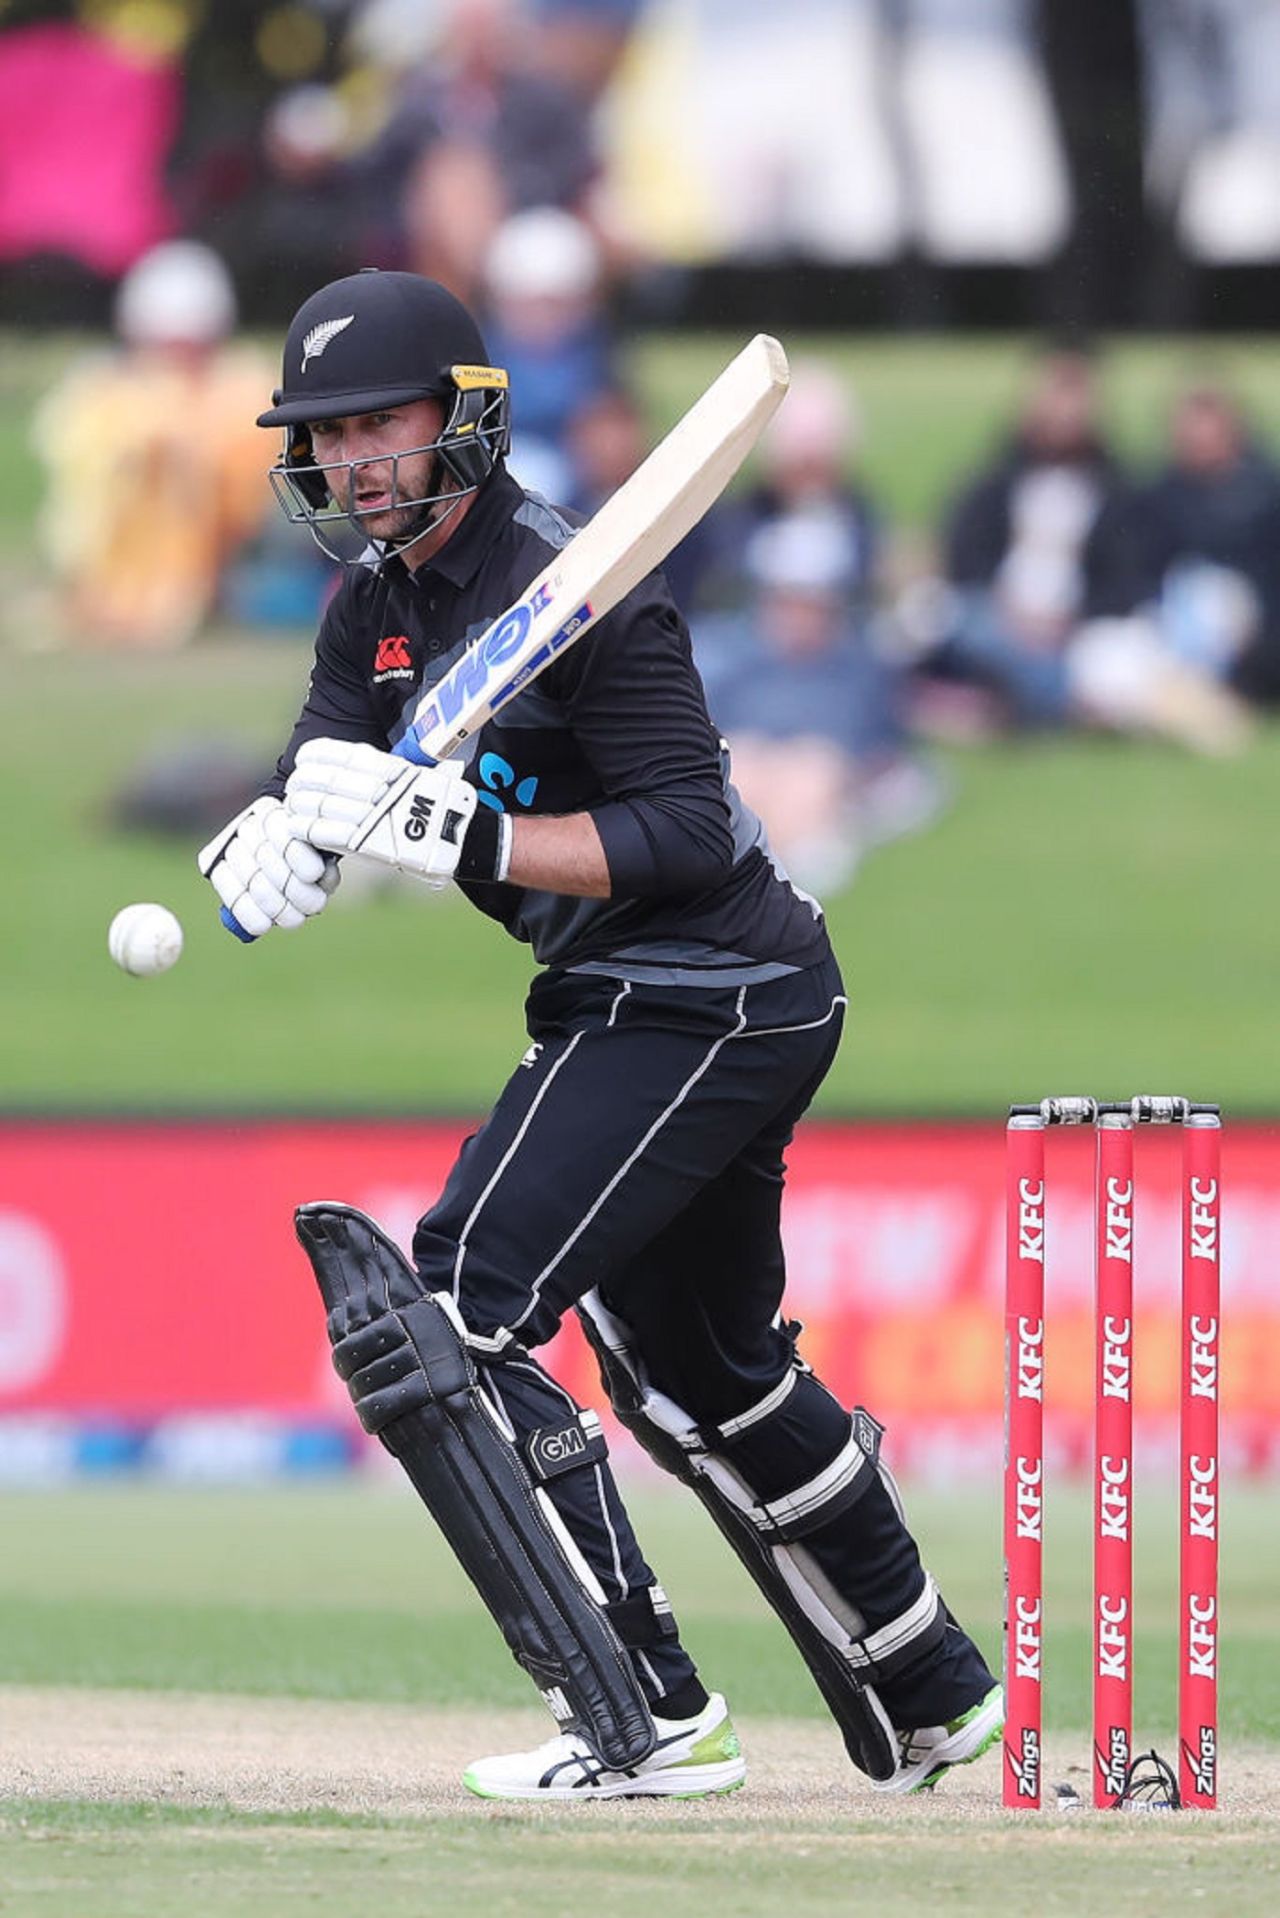 Devon Conway in action, New Zealand vs West Indies, 2nd T20I, Mount Maunganui, November 29, 2020